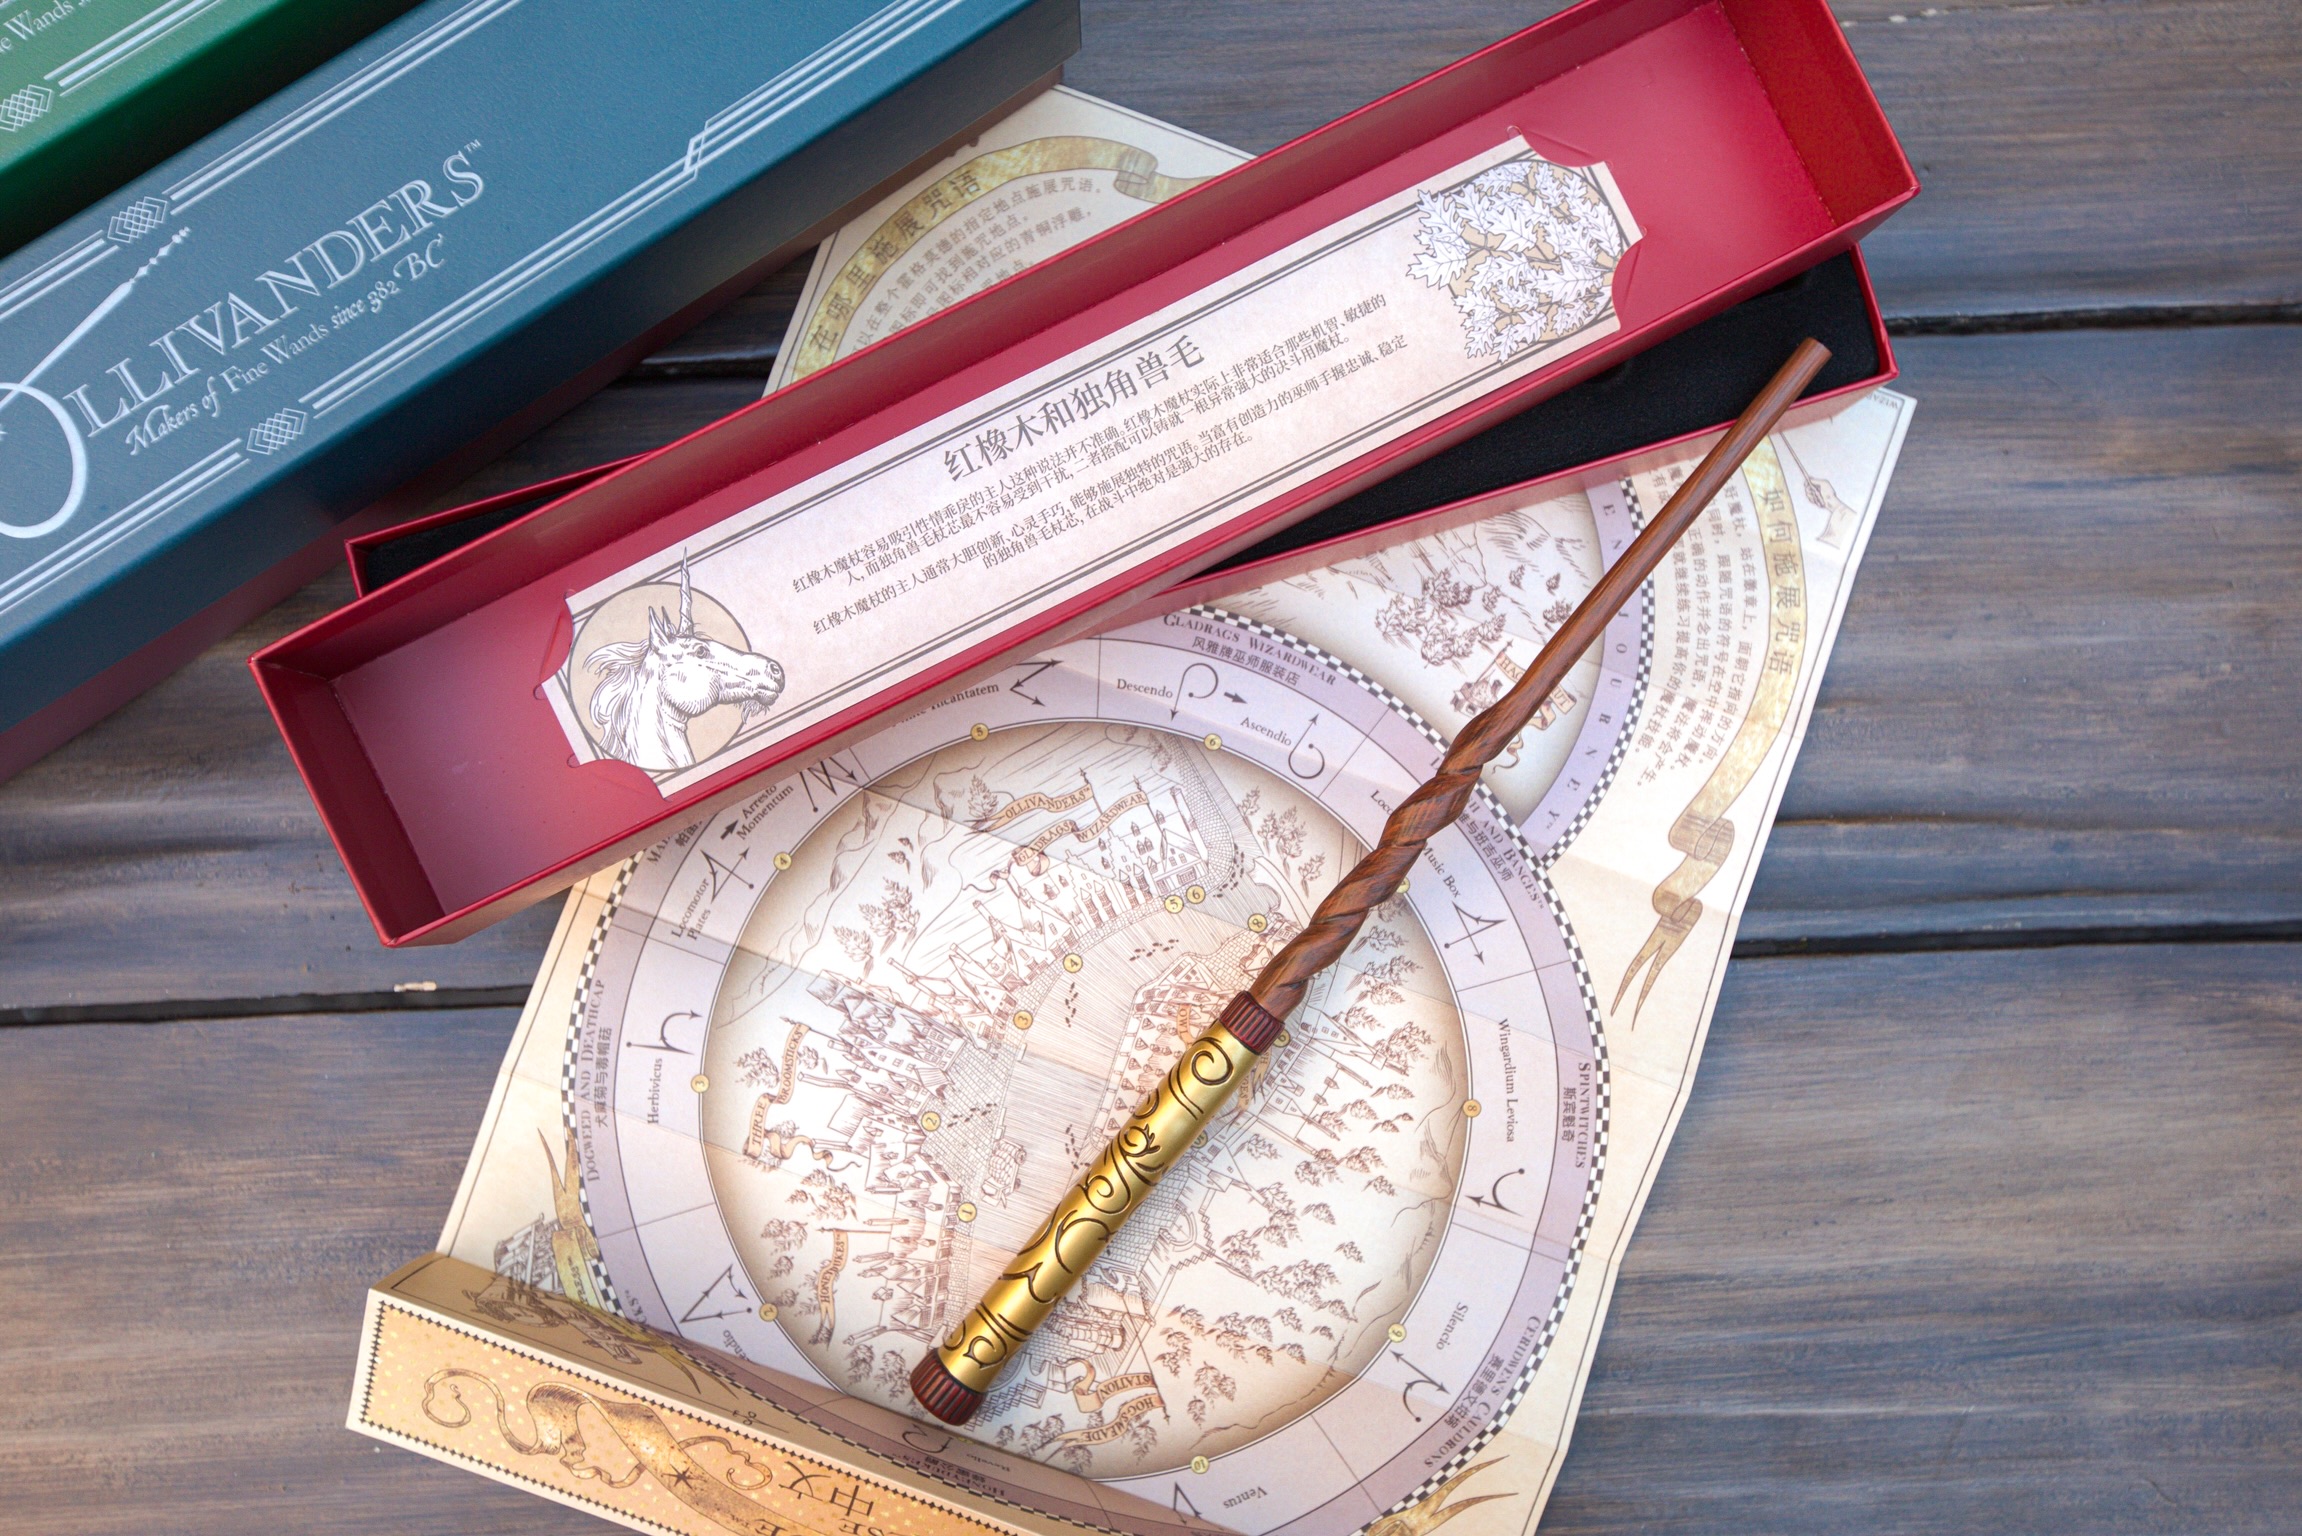 The Wizarding World of Harry Potter Debuts All-New Collection of Interactive Ollivanders Wands Available Exclusively at Universal Parks across the Globe